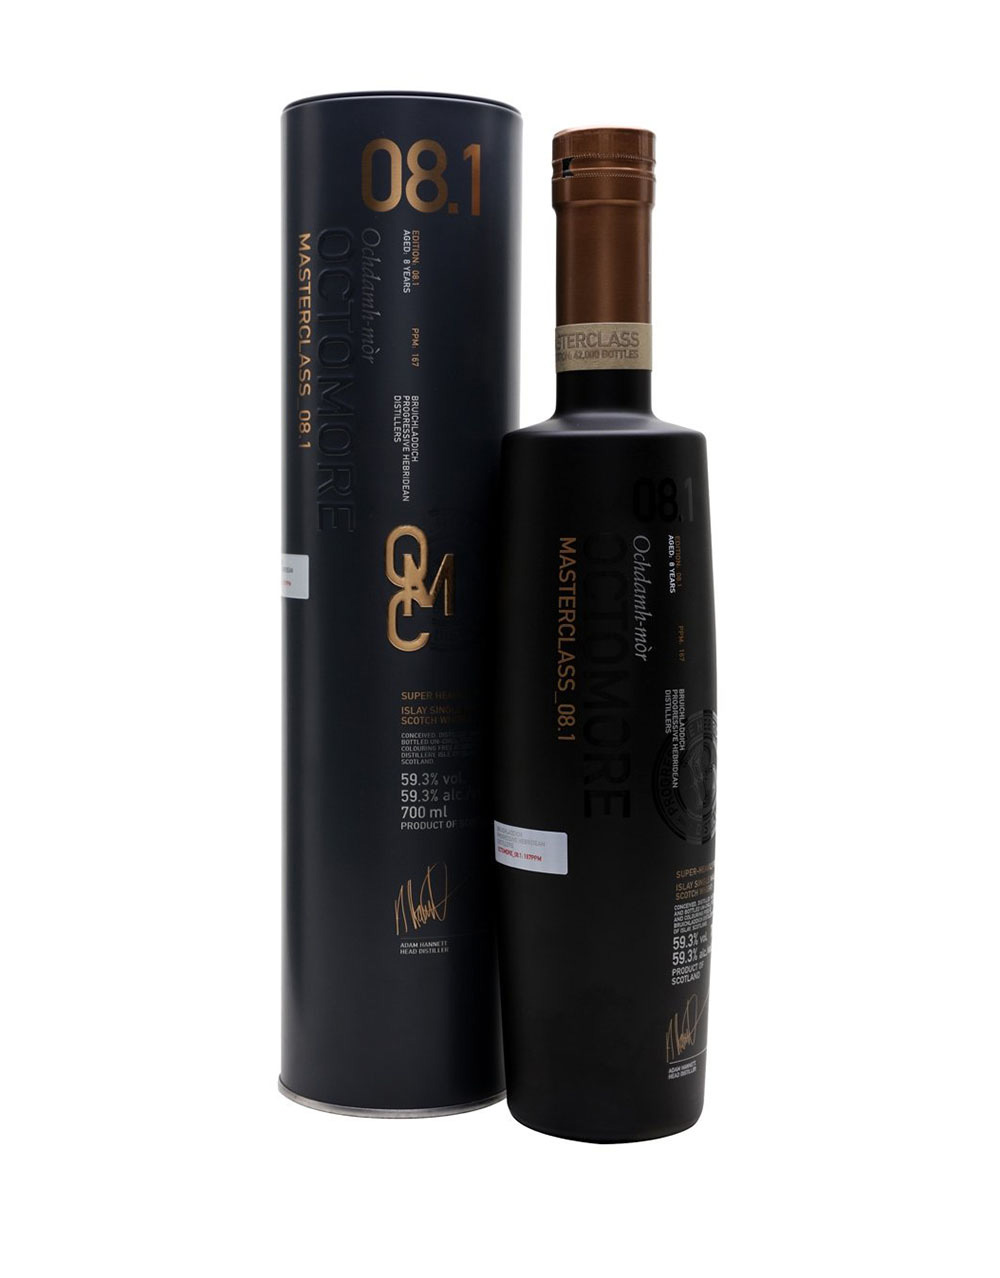 Bruichladdich Octomore Masterclass 08.1 8 Year Old Whisky